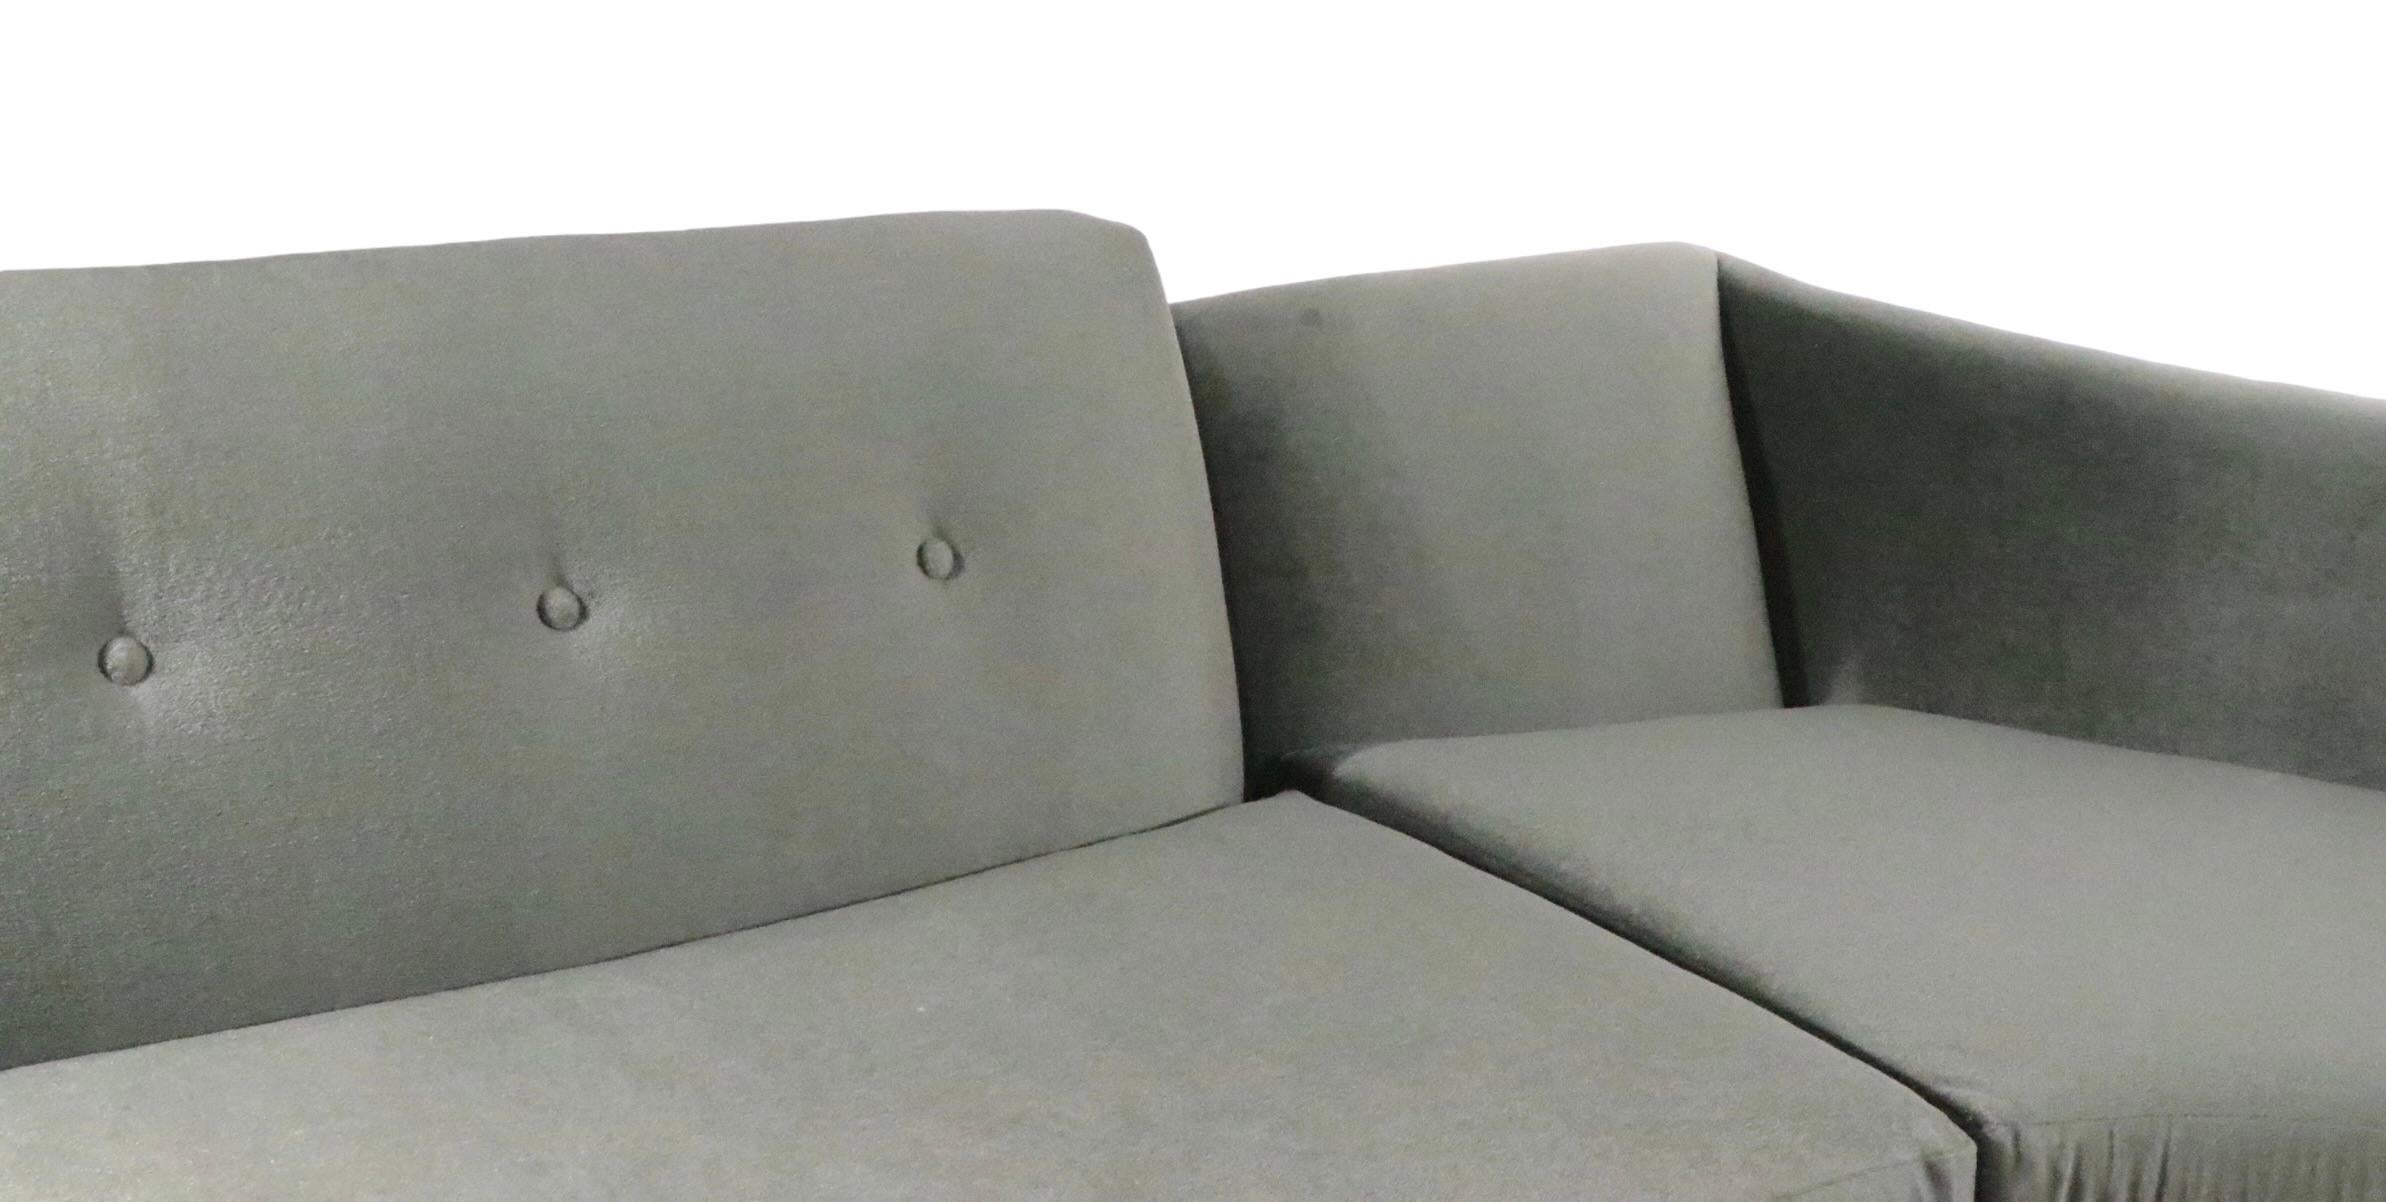 Metal Glamorous Hollywood Regency Mid Century Art Deco Sectional Sofa c 1930s/1950s For Sale